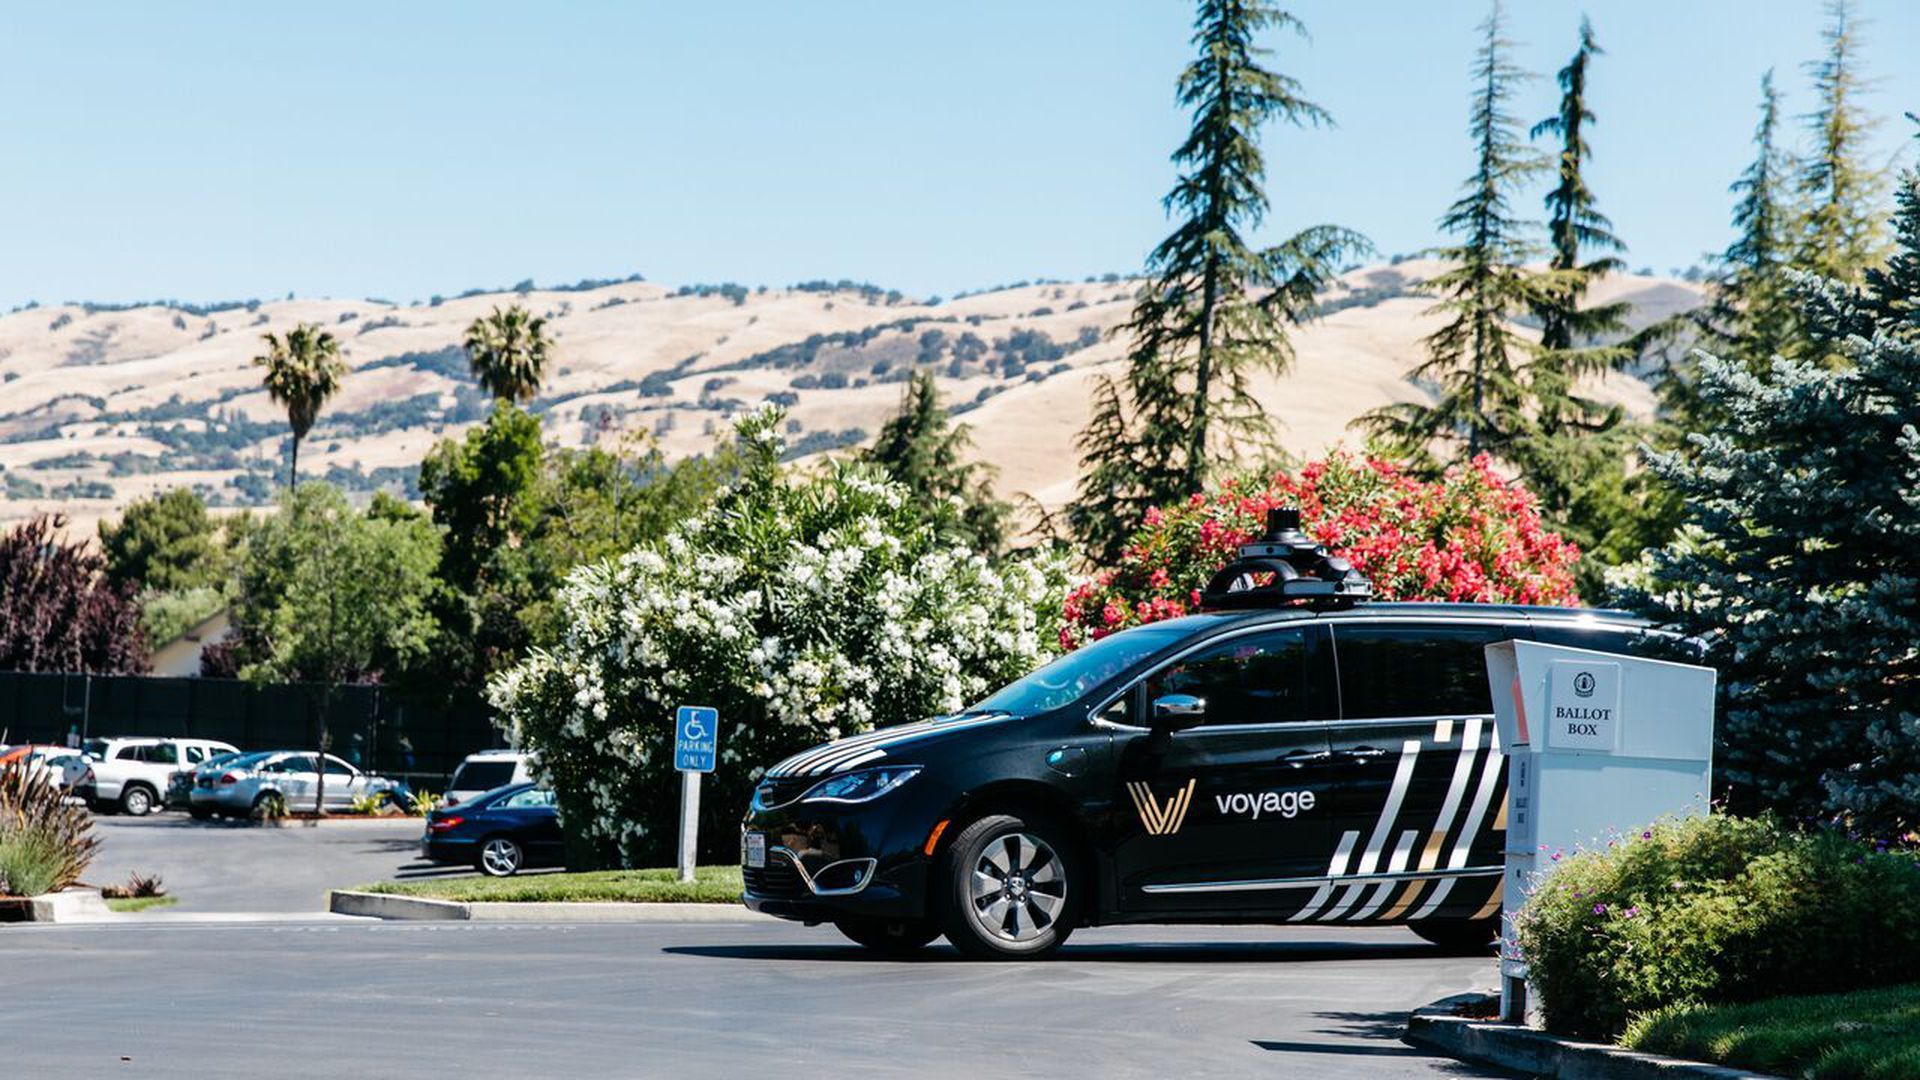 Voyage's self-driving technology on the road.